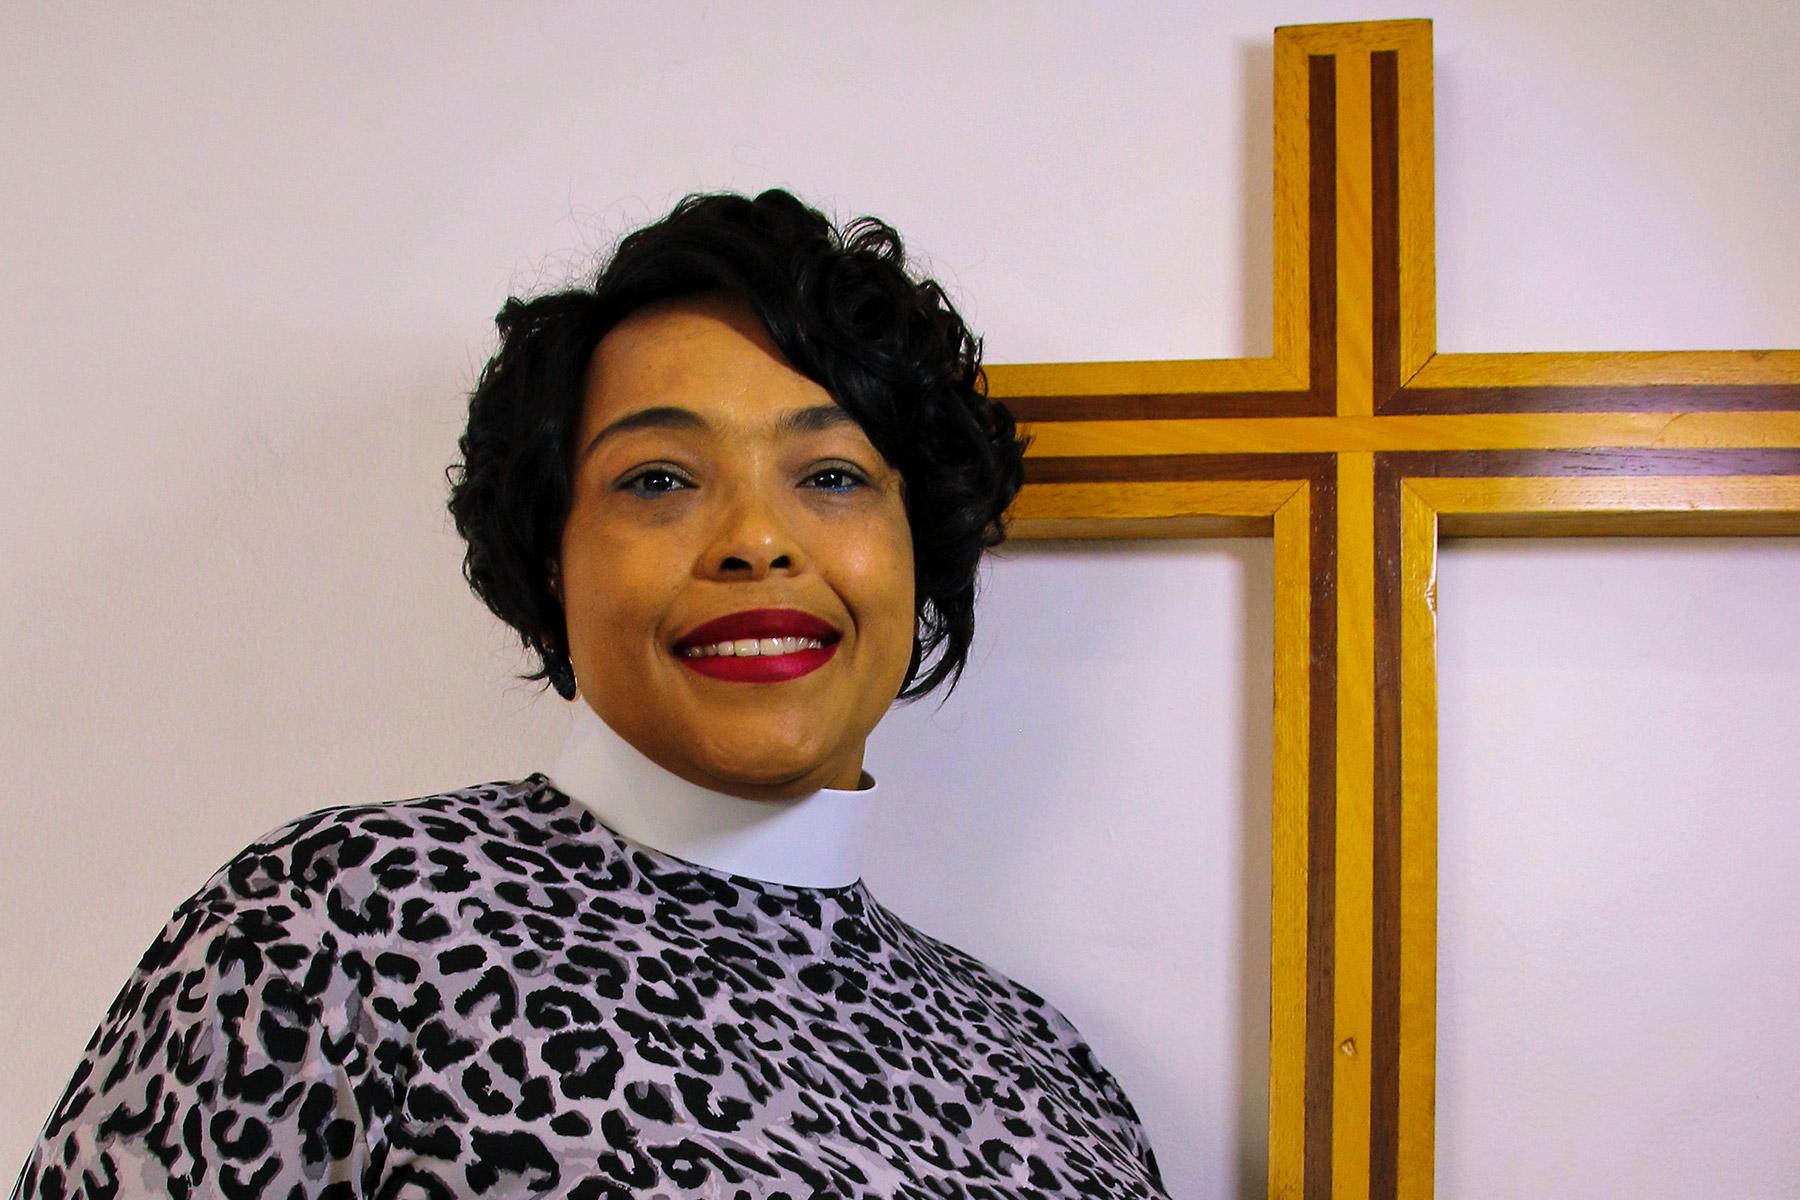 South Africa: “Seeking God wholeheartedly” in her work